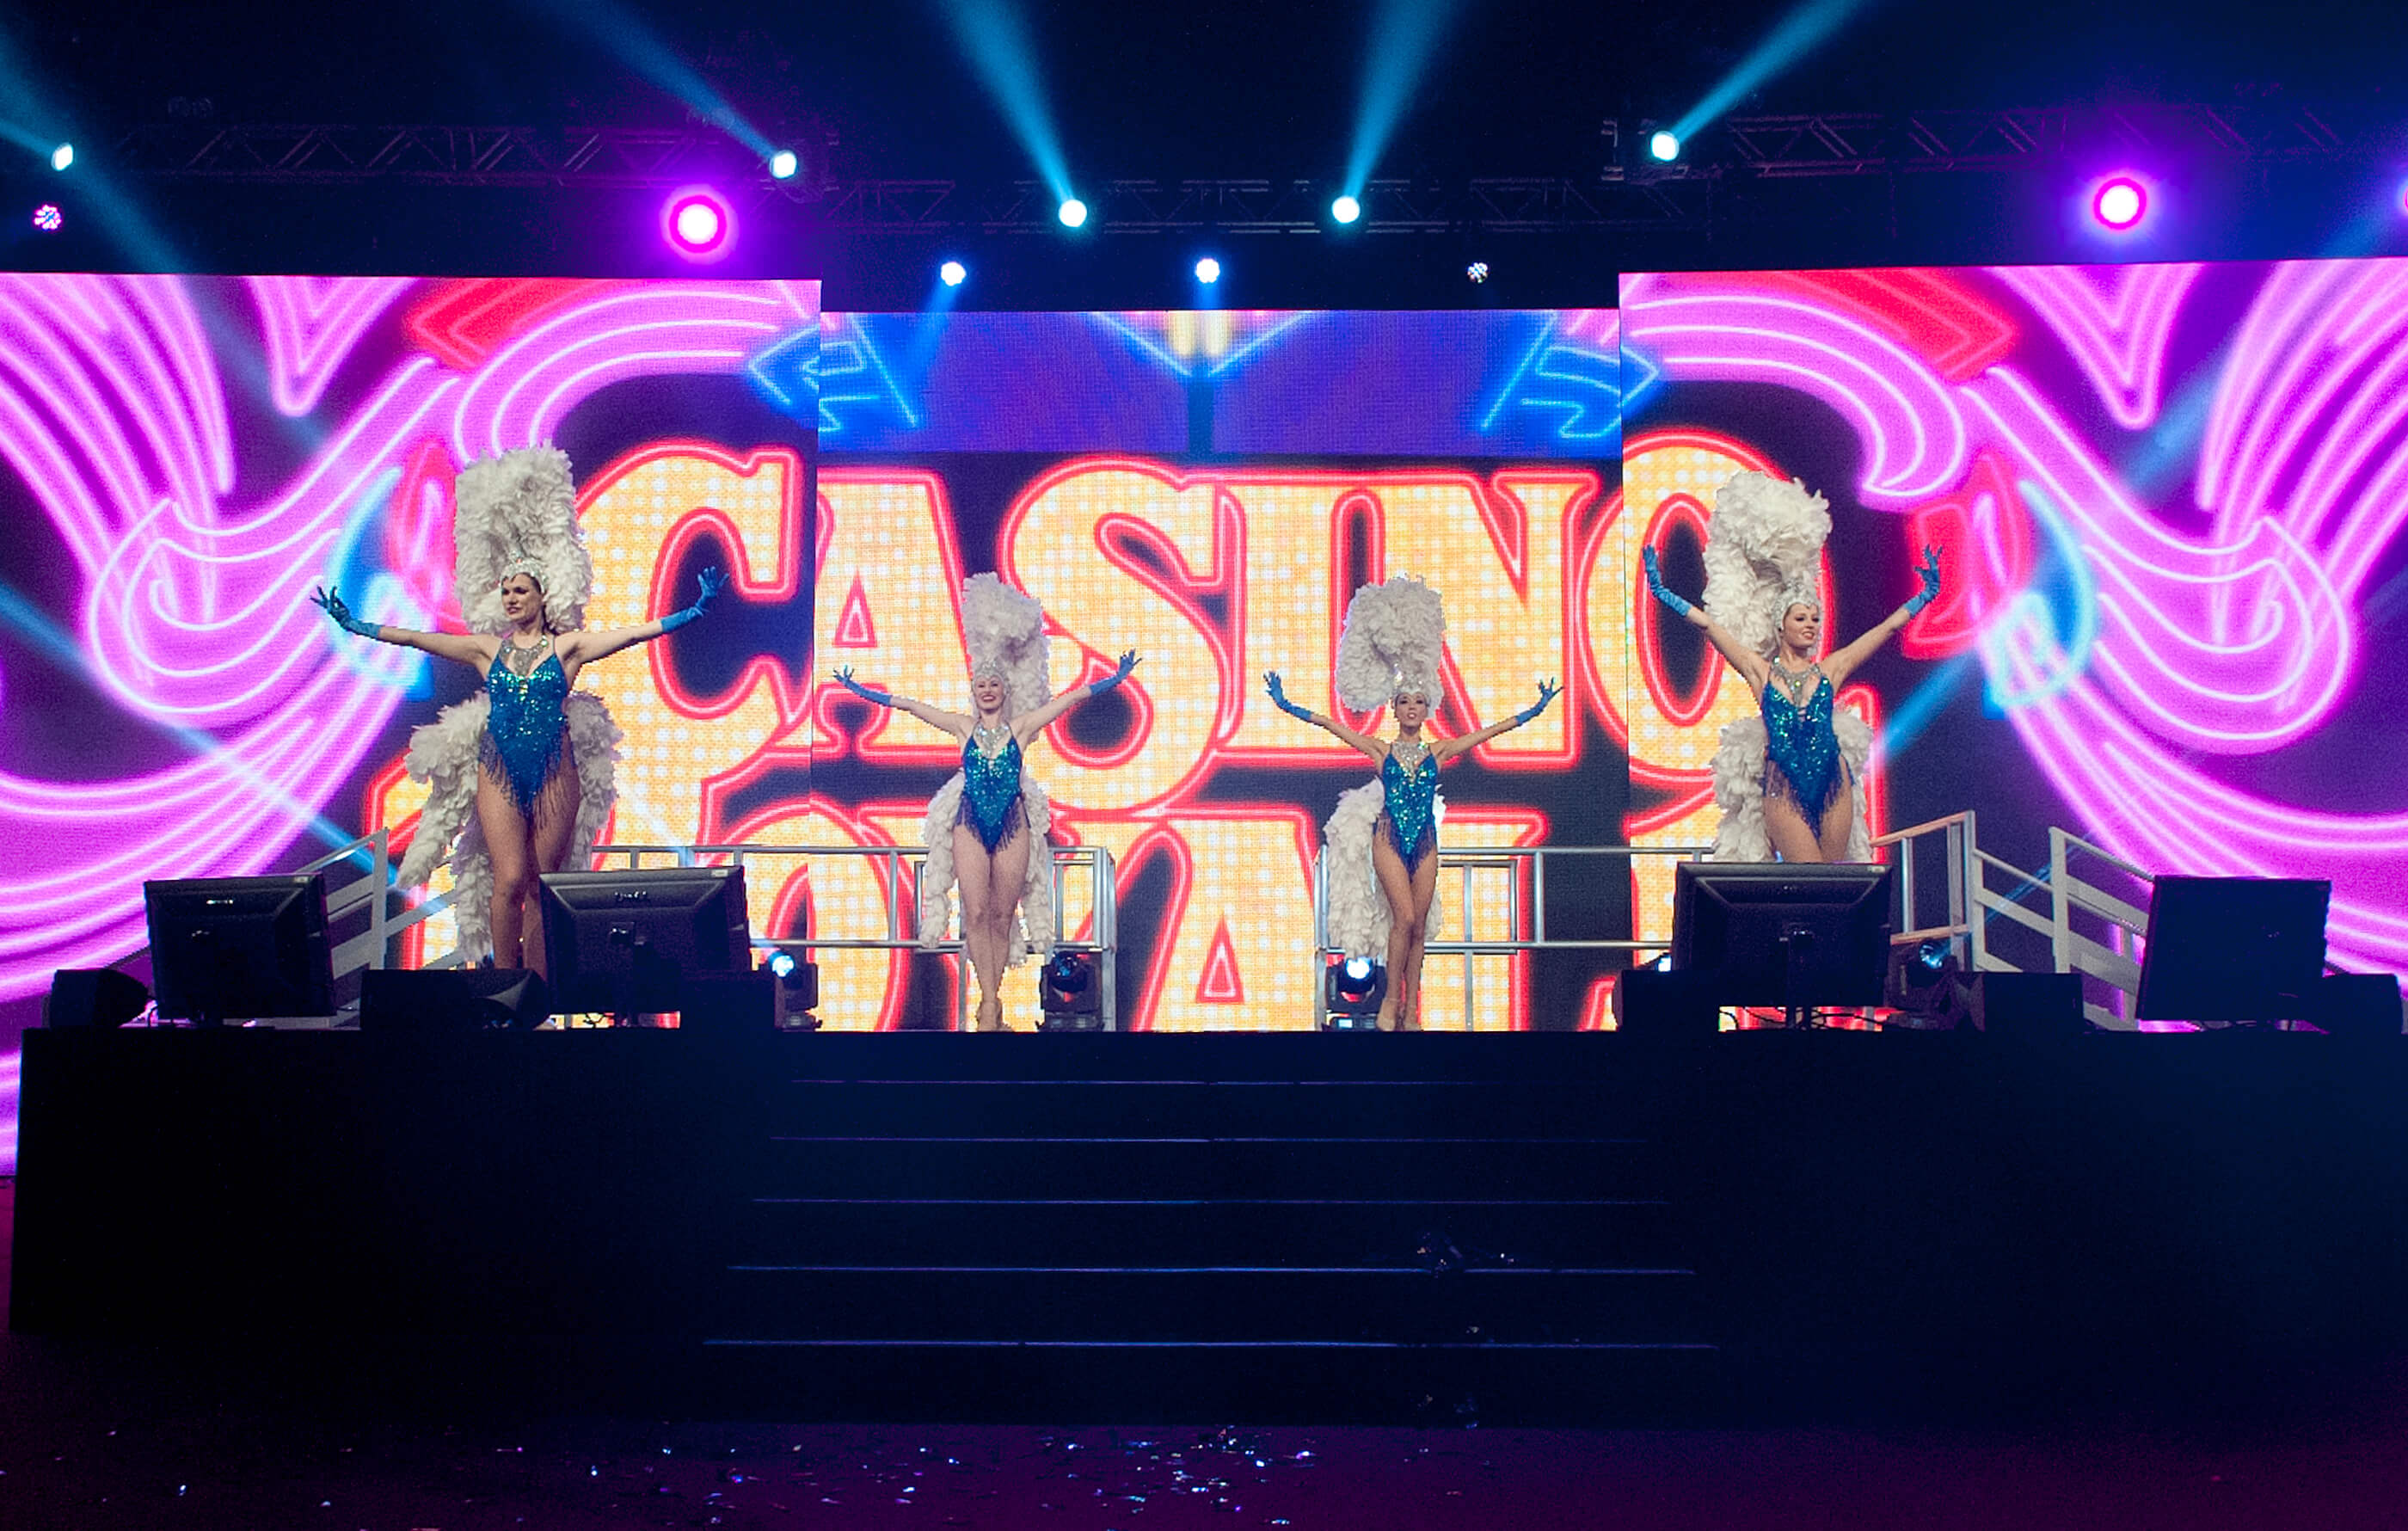 Casino Royale animated stage backdrop, behind four dancers dressed in blue sequin outfits with white feathers